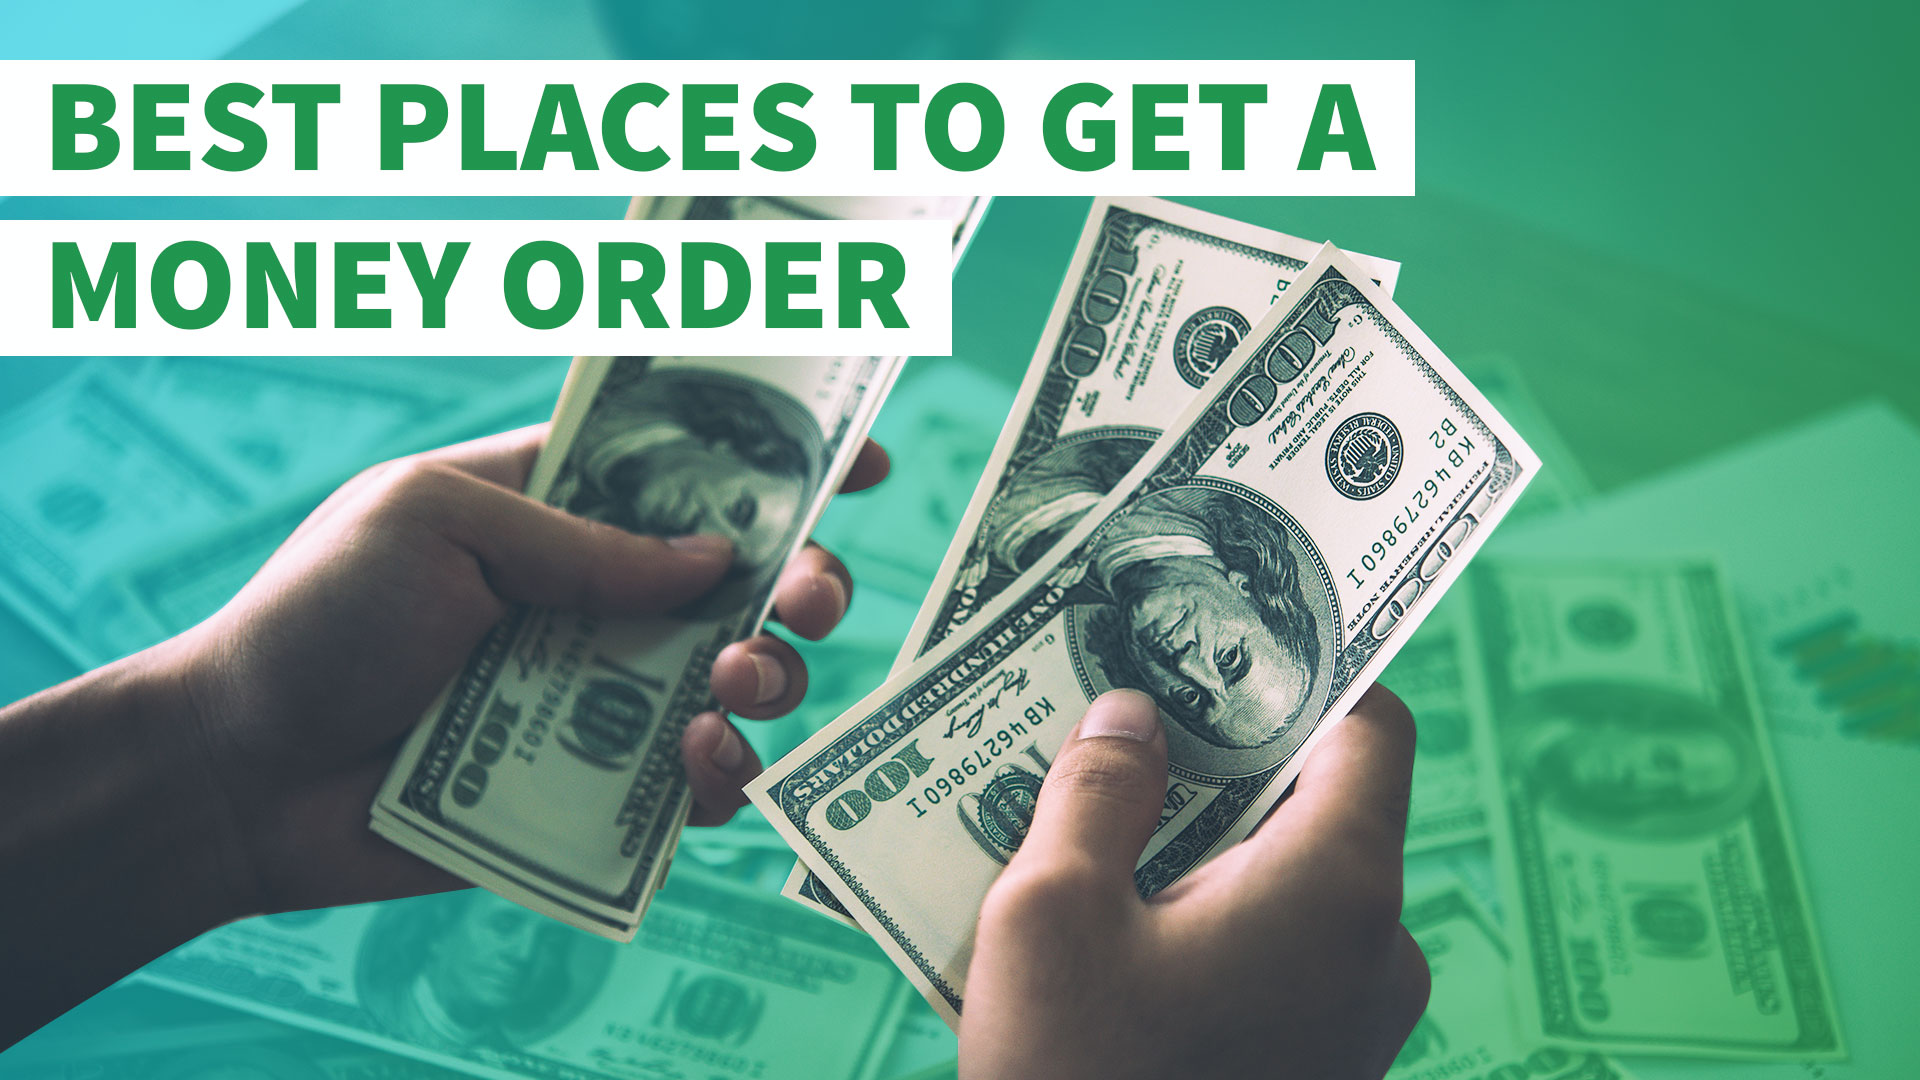 5 Best Places to Get a Money Order | GOBankingRates